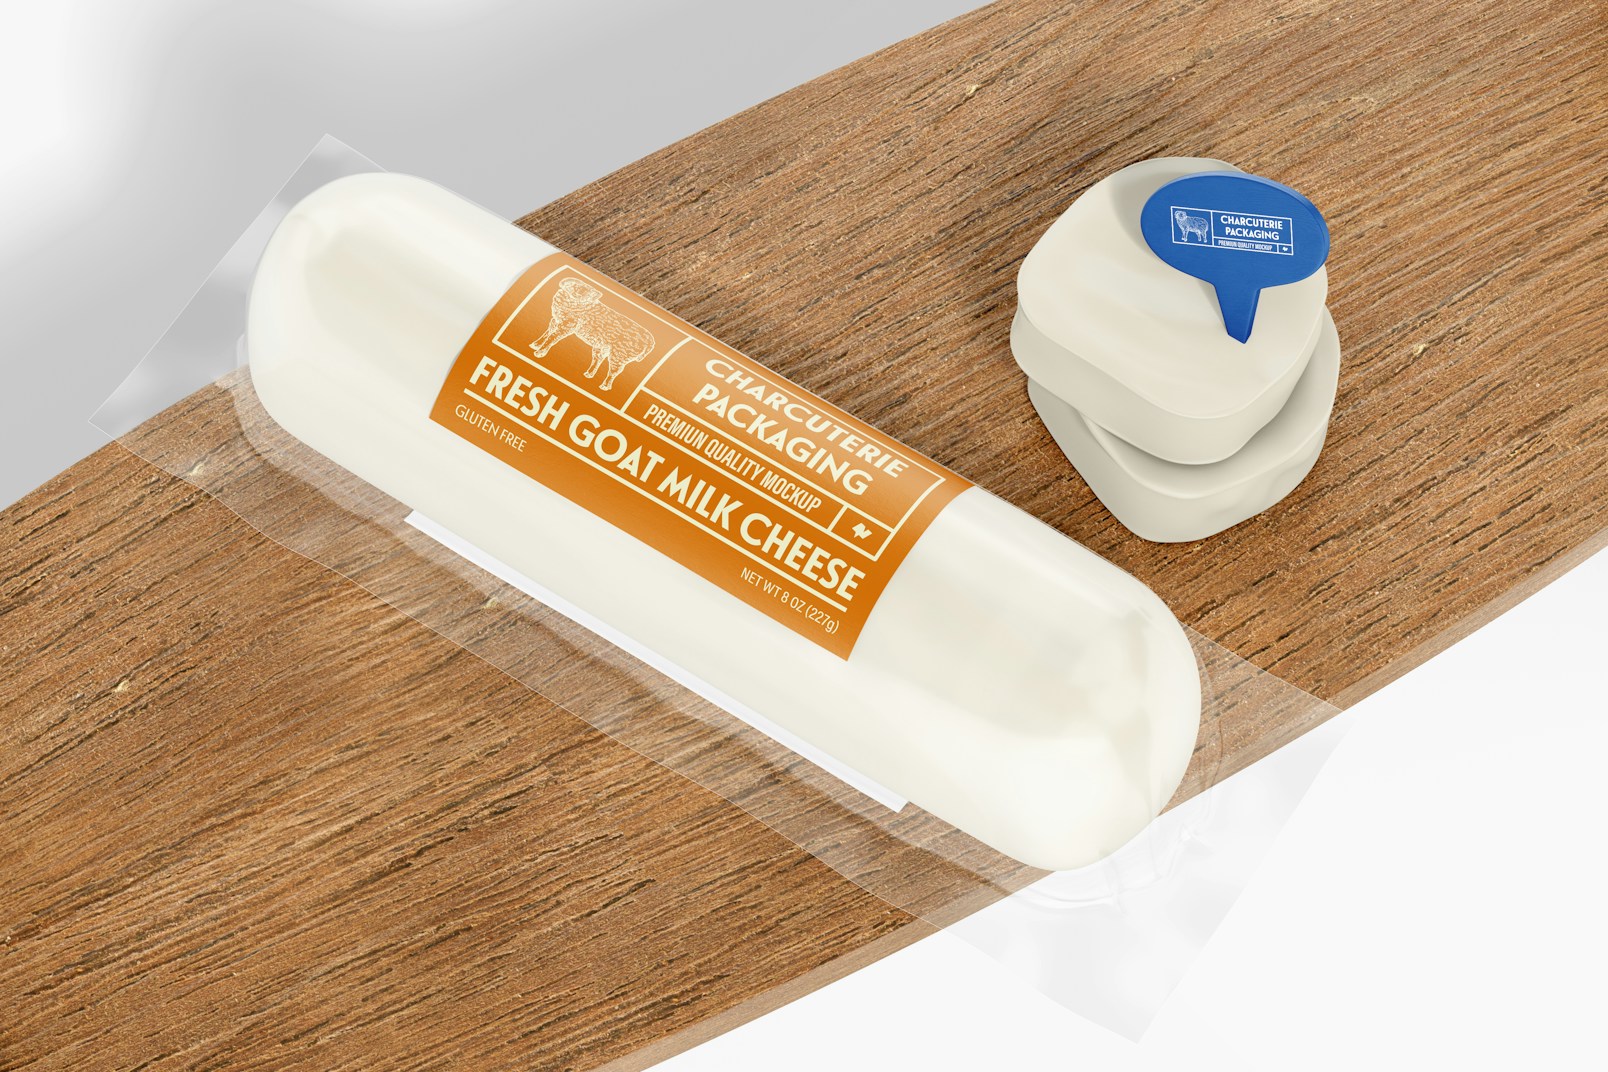 Goat Cheese Packaging Mockup, on Plate